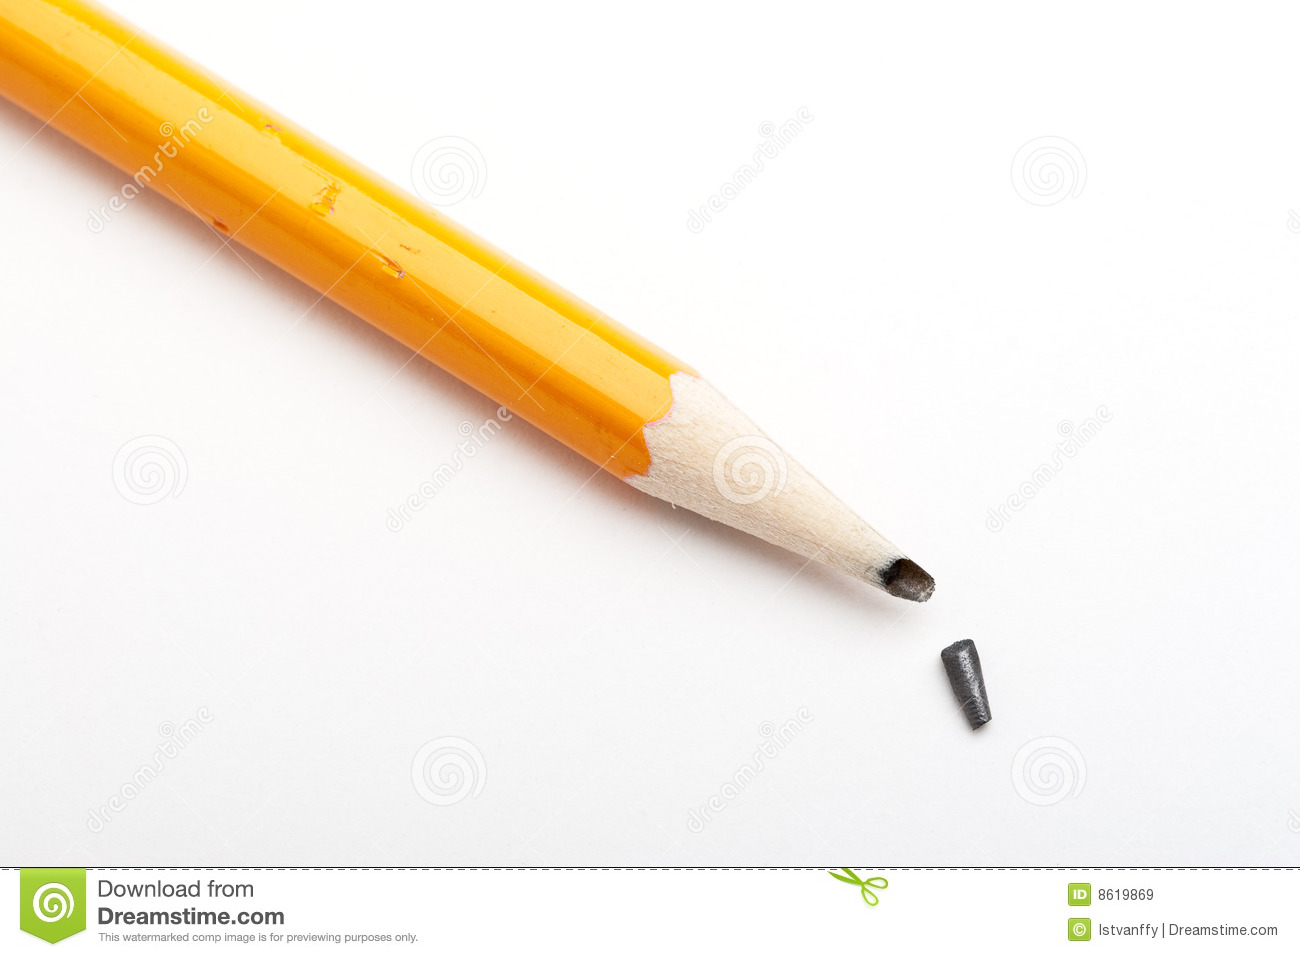 Black Pencil With A Broken Point Royalty Free Stock Images   Image